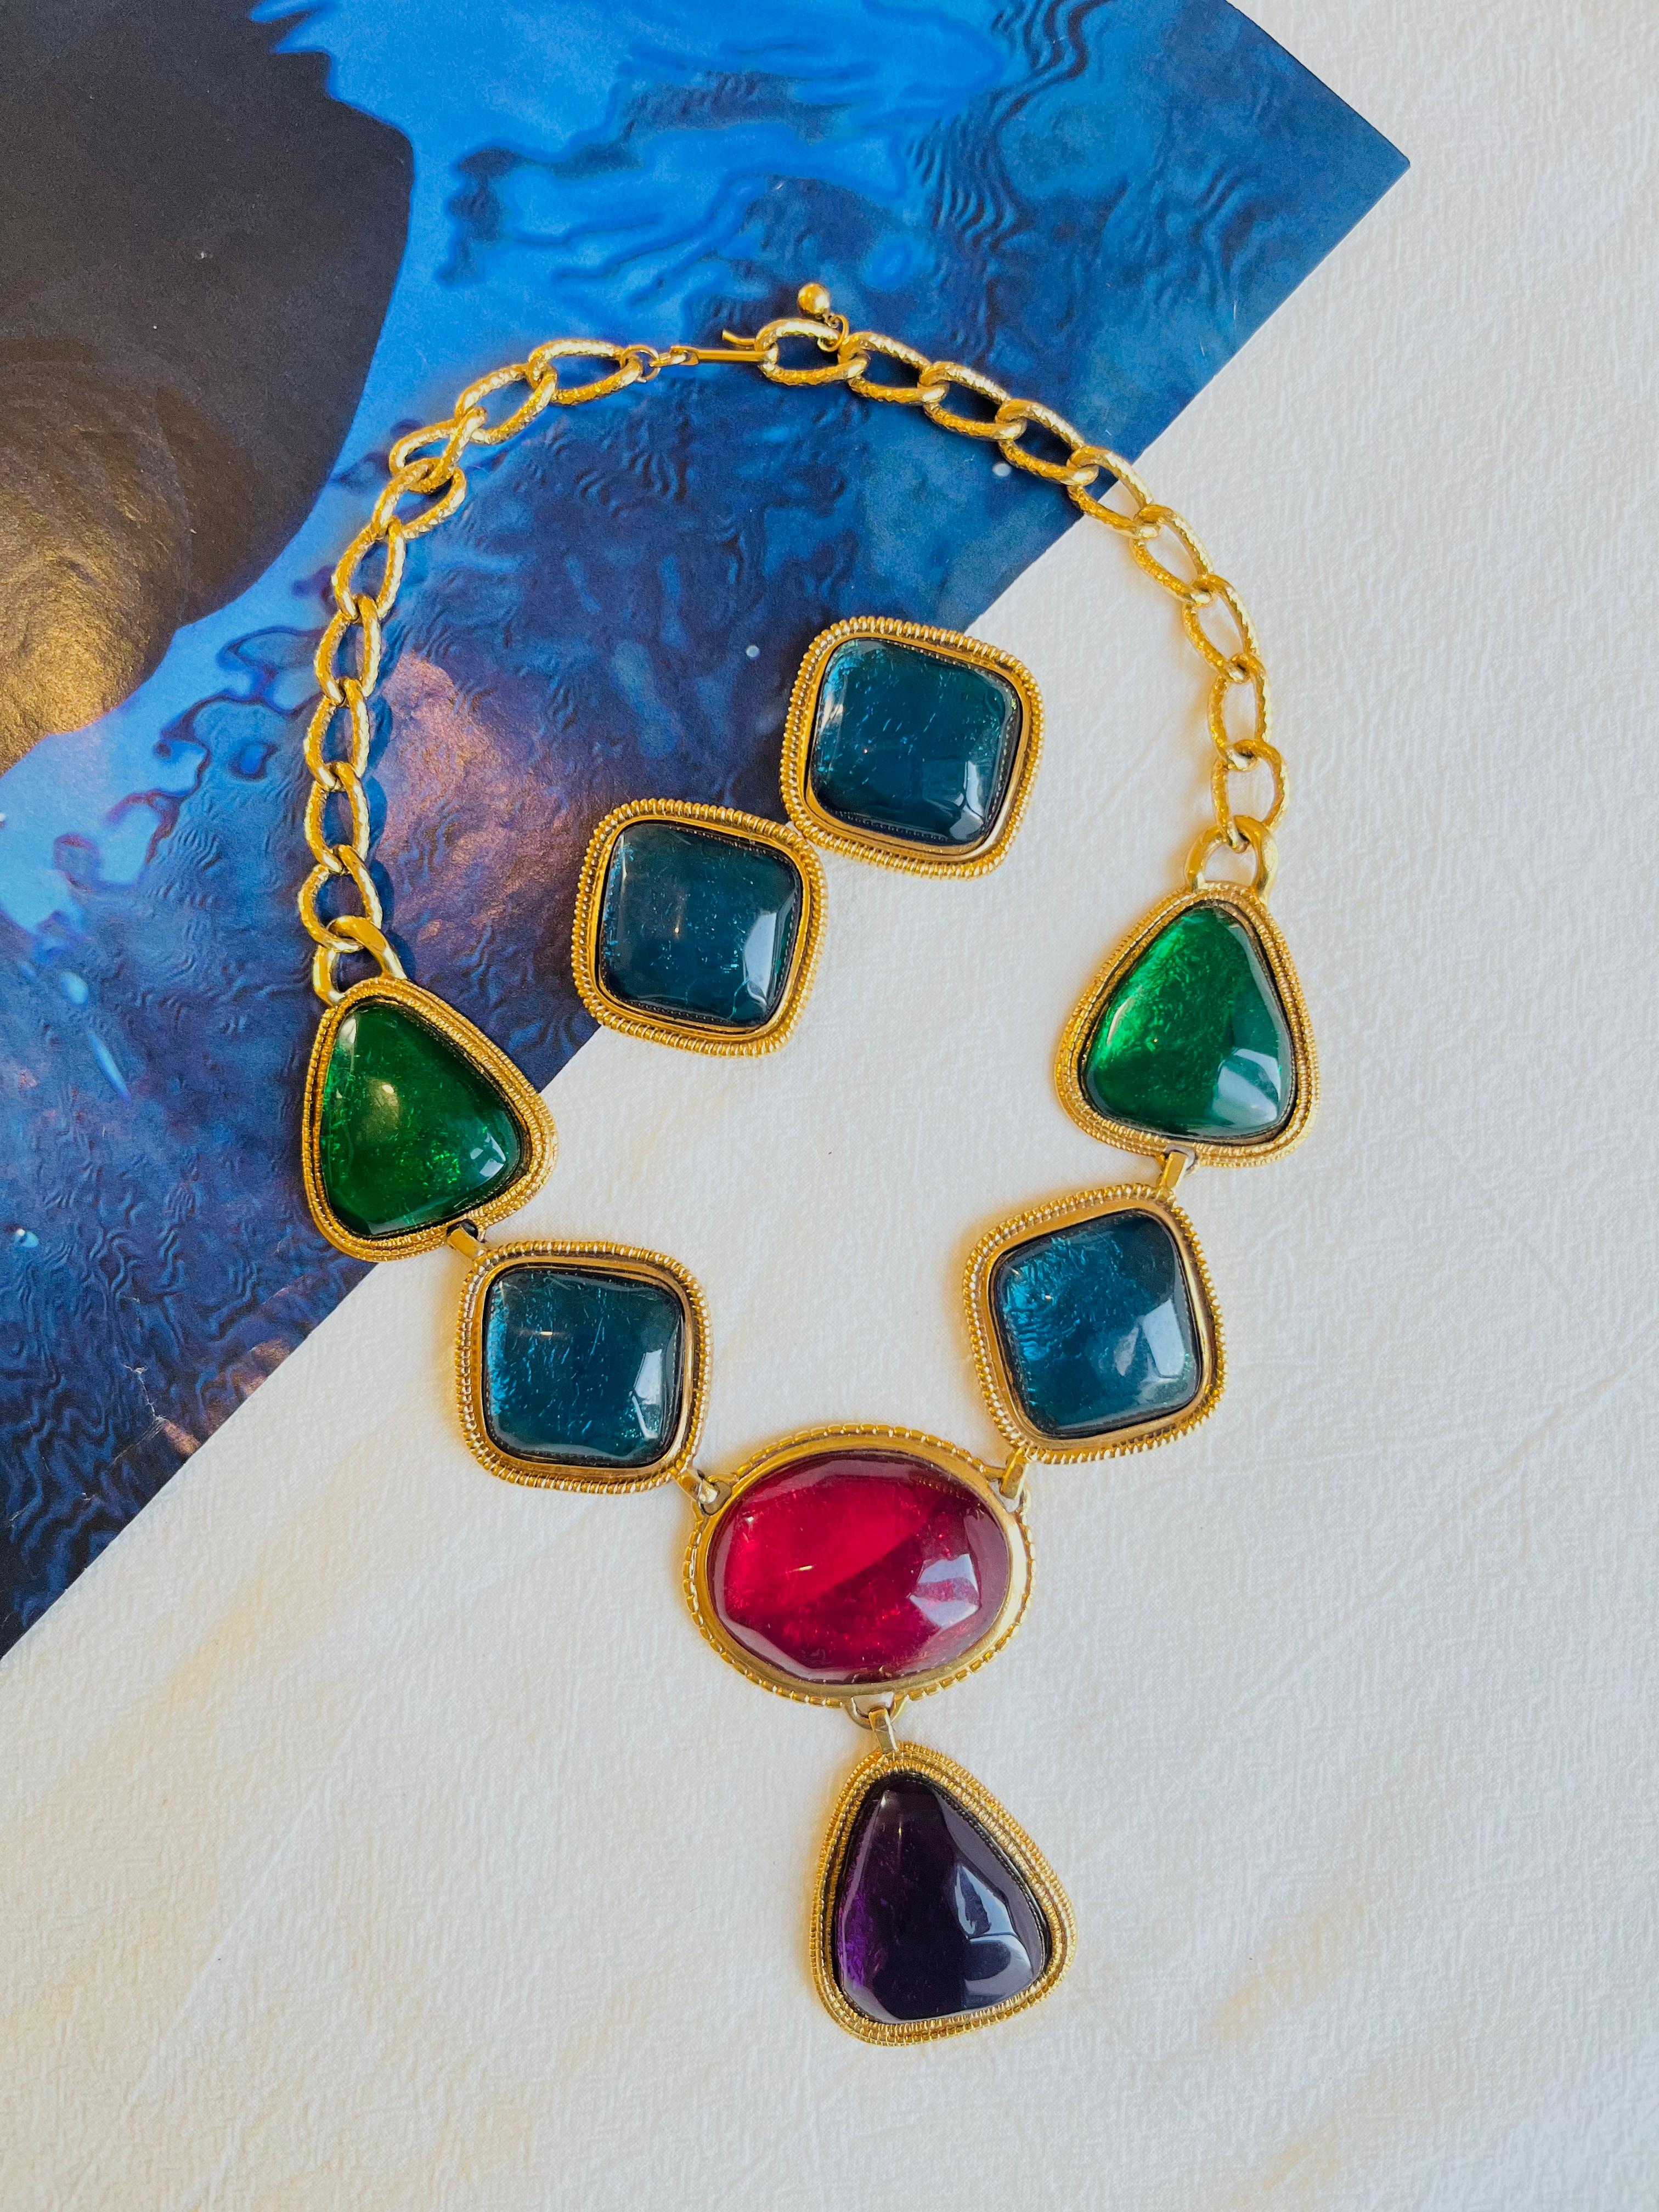 Kenneth Jay Lane KJL Avon Vintage Gripoix Cabochons Emerald Sapphire Ruby Amethyst Set Chunky Y Necklace Earrings, Gold Tone

Very good condition. Light scratches, barely noticeable. 100% Genuine. Vintage and rare to find.

This beautiful jewelry